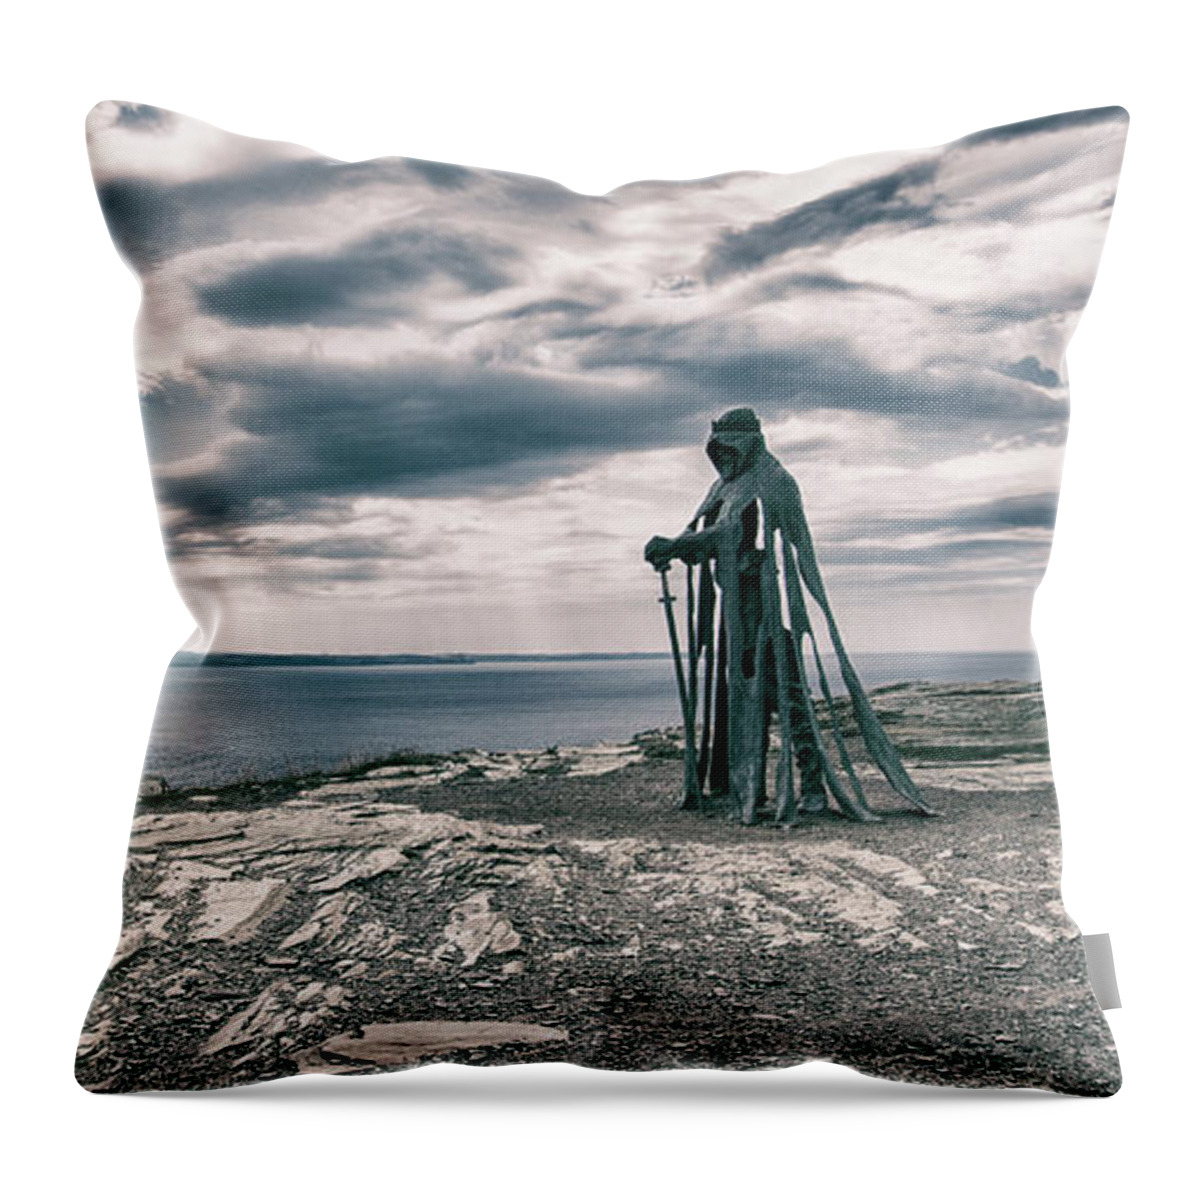 Cornwall Throw Pillow featuring the photograph King Arthurs Statue by Martin Newman